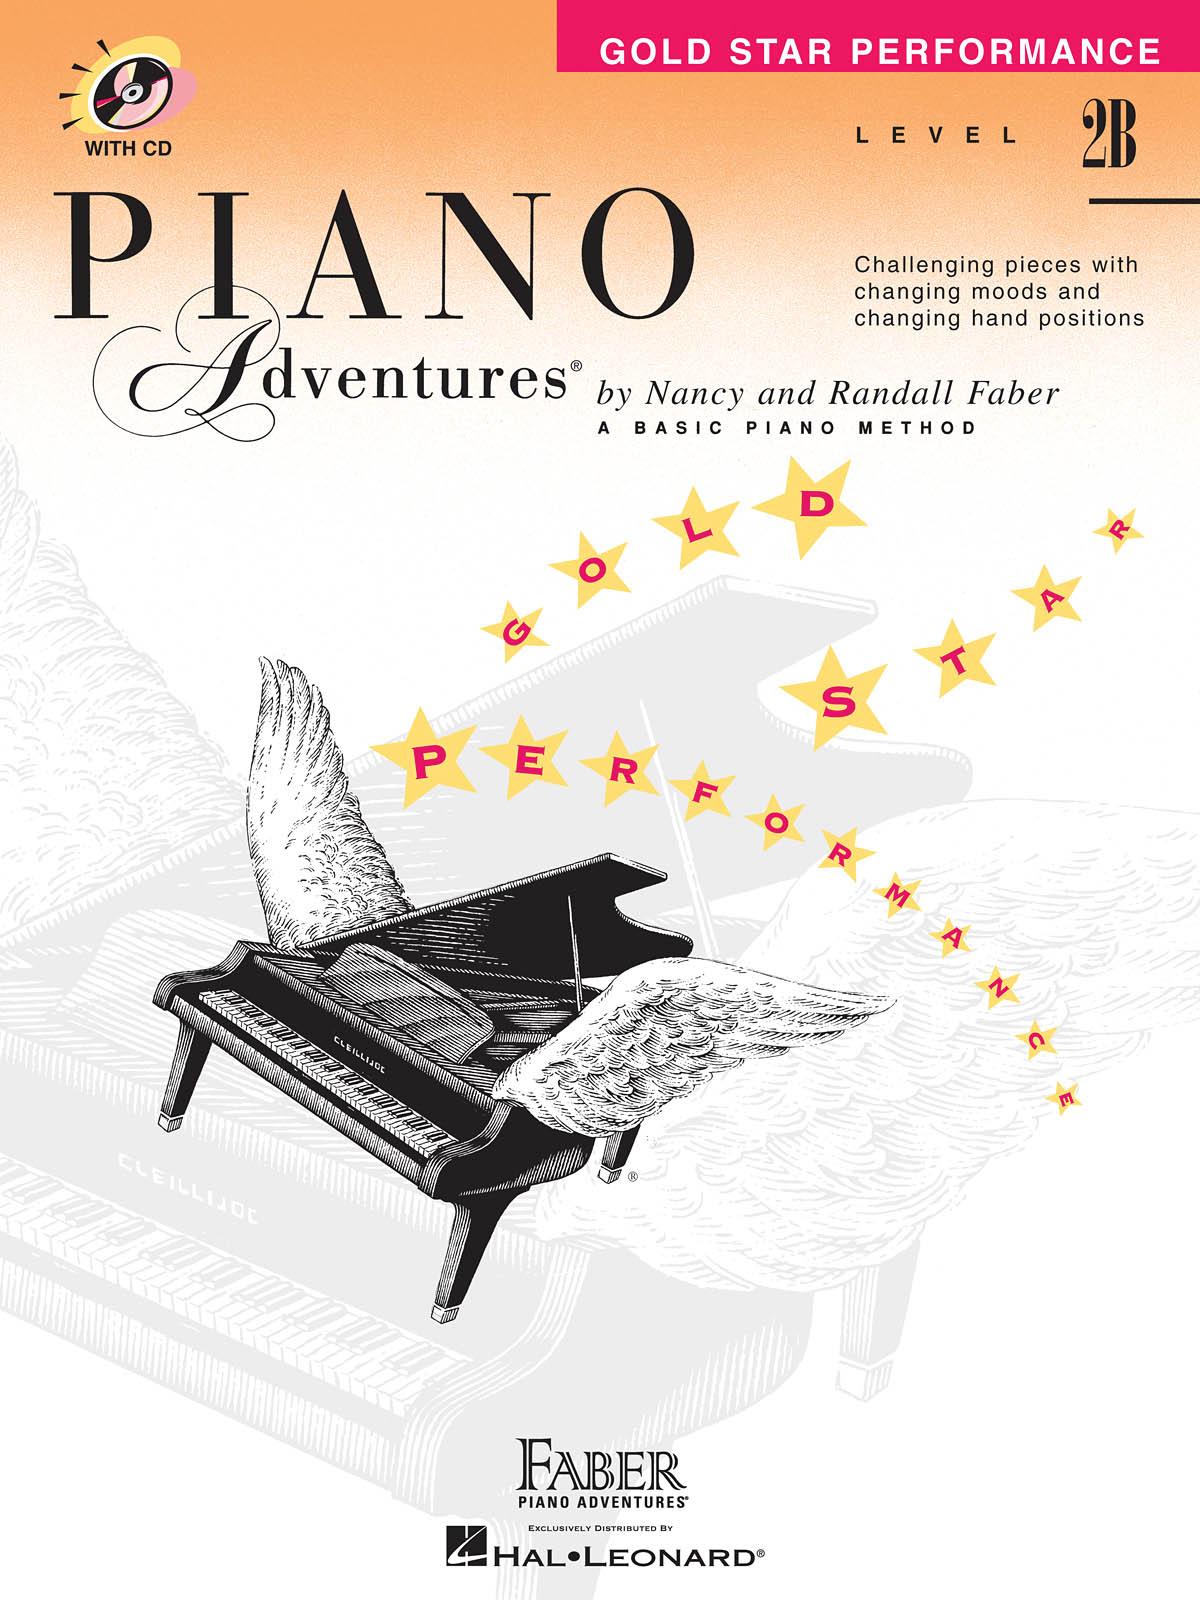 Faber Piano Adventures: Level 2b Gold Star Performance